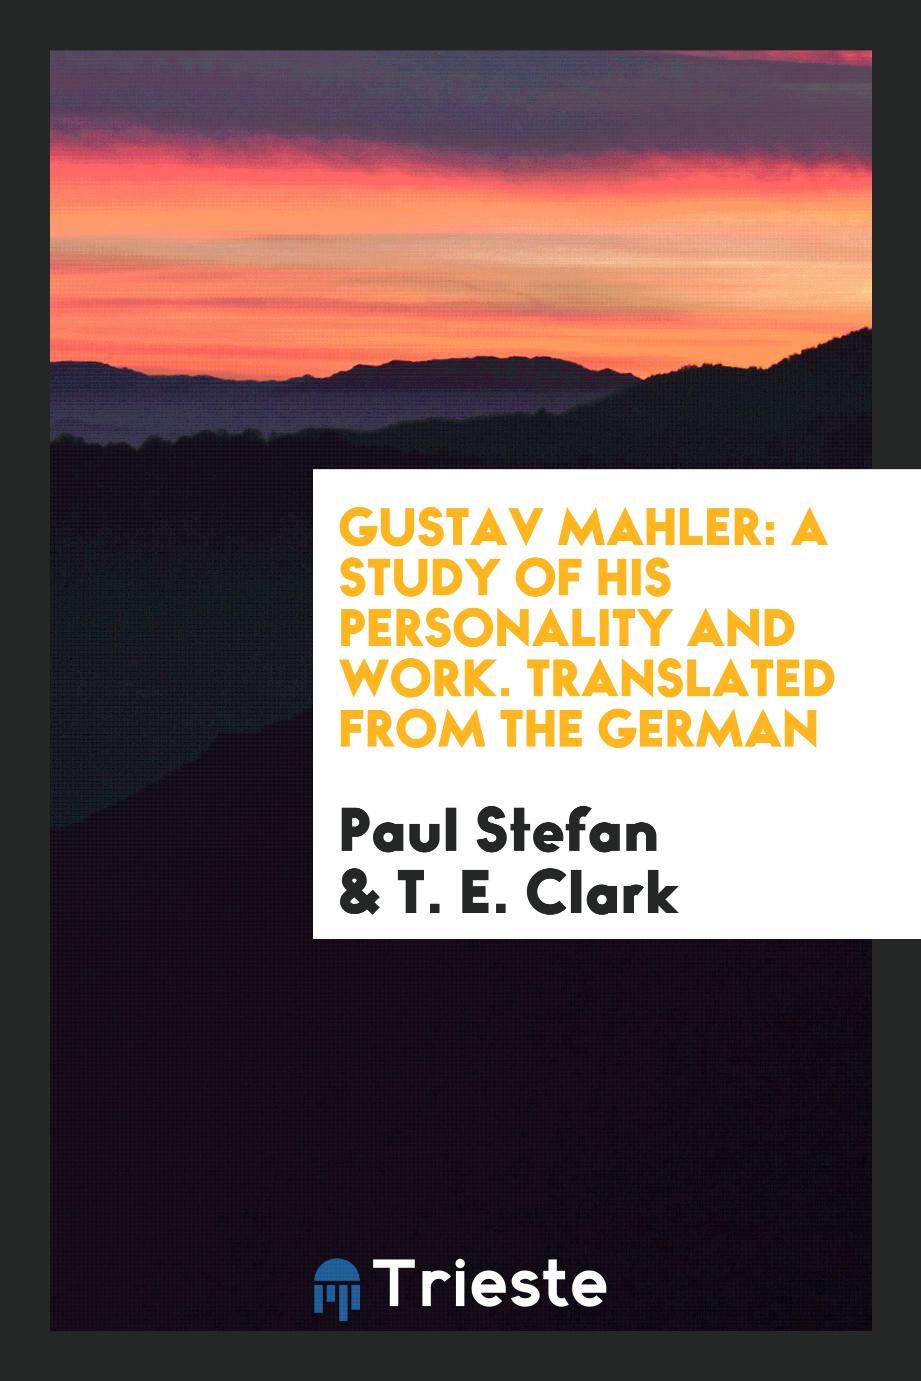 Gustav Mahler: A Study of His Personality and Work. Translated from the German